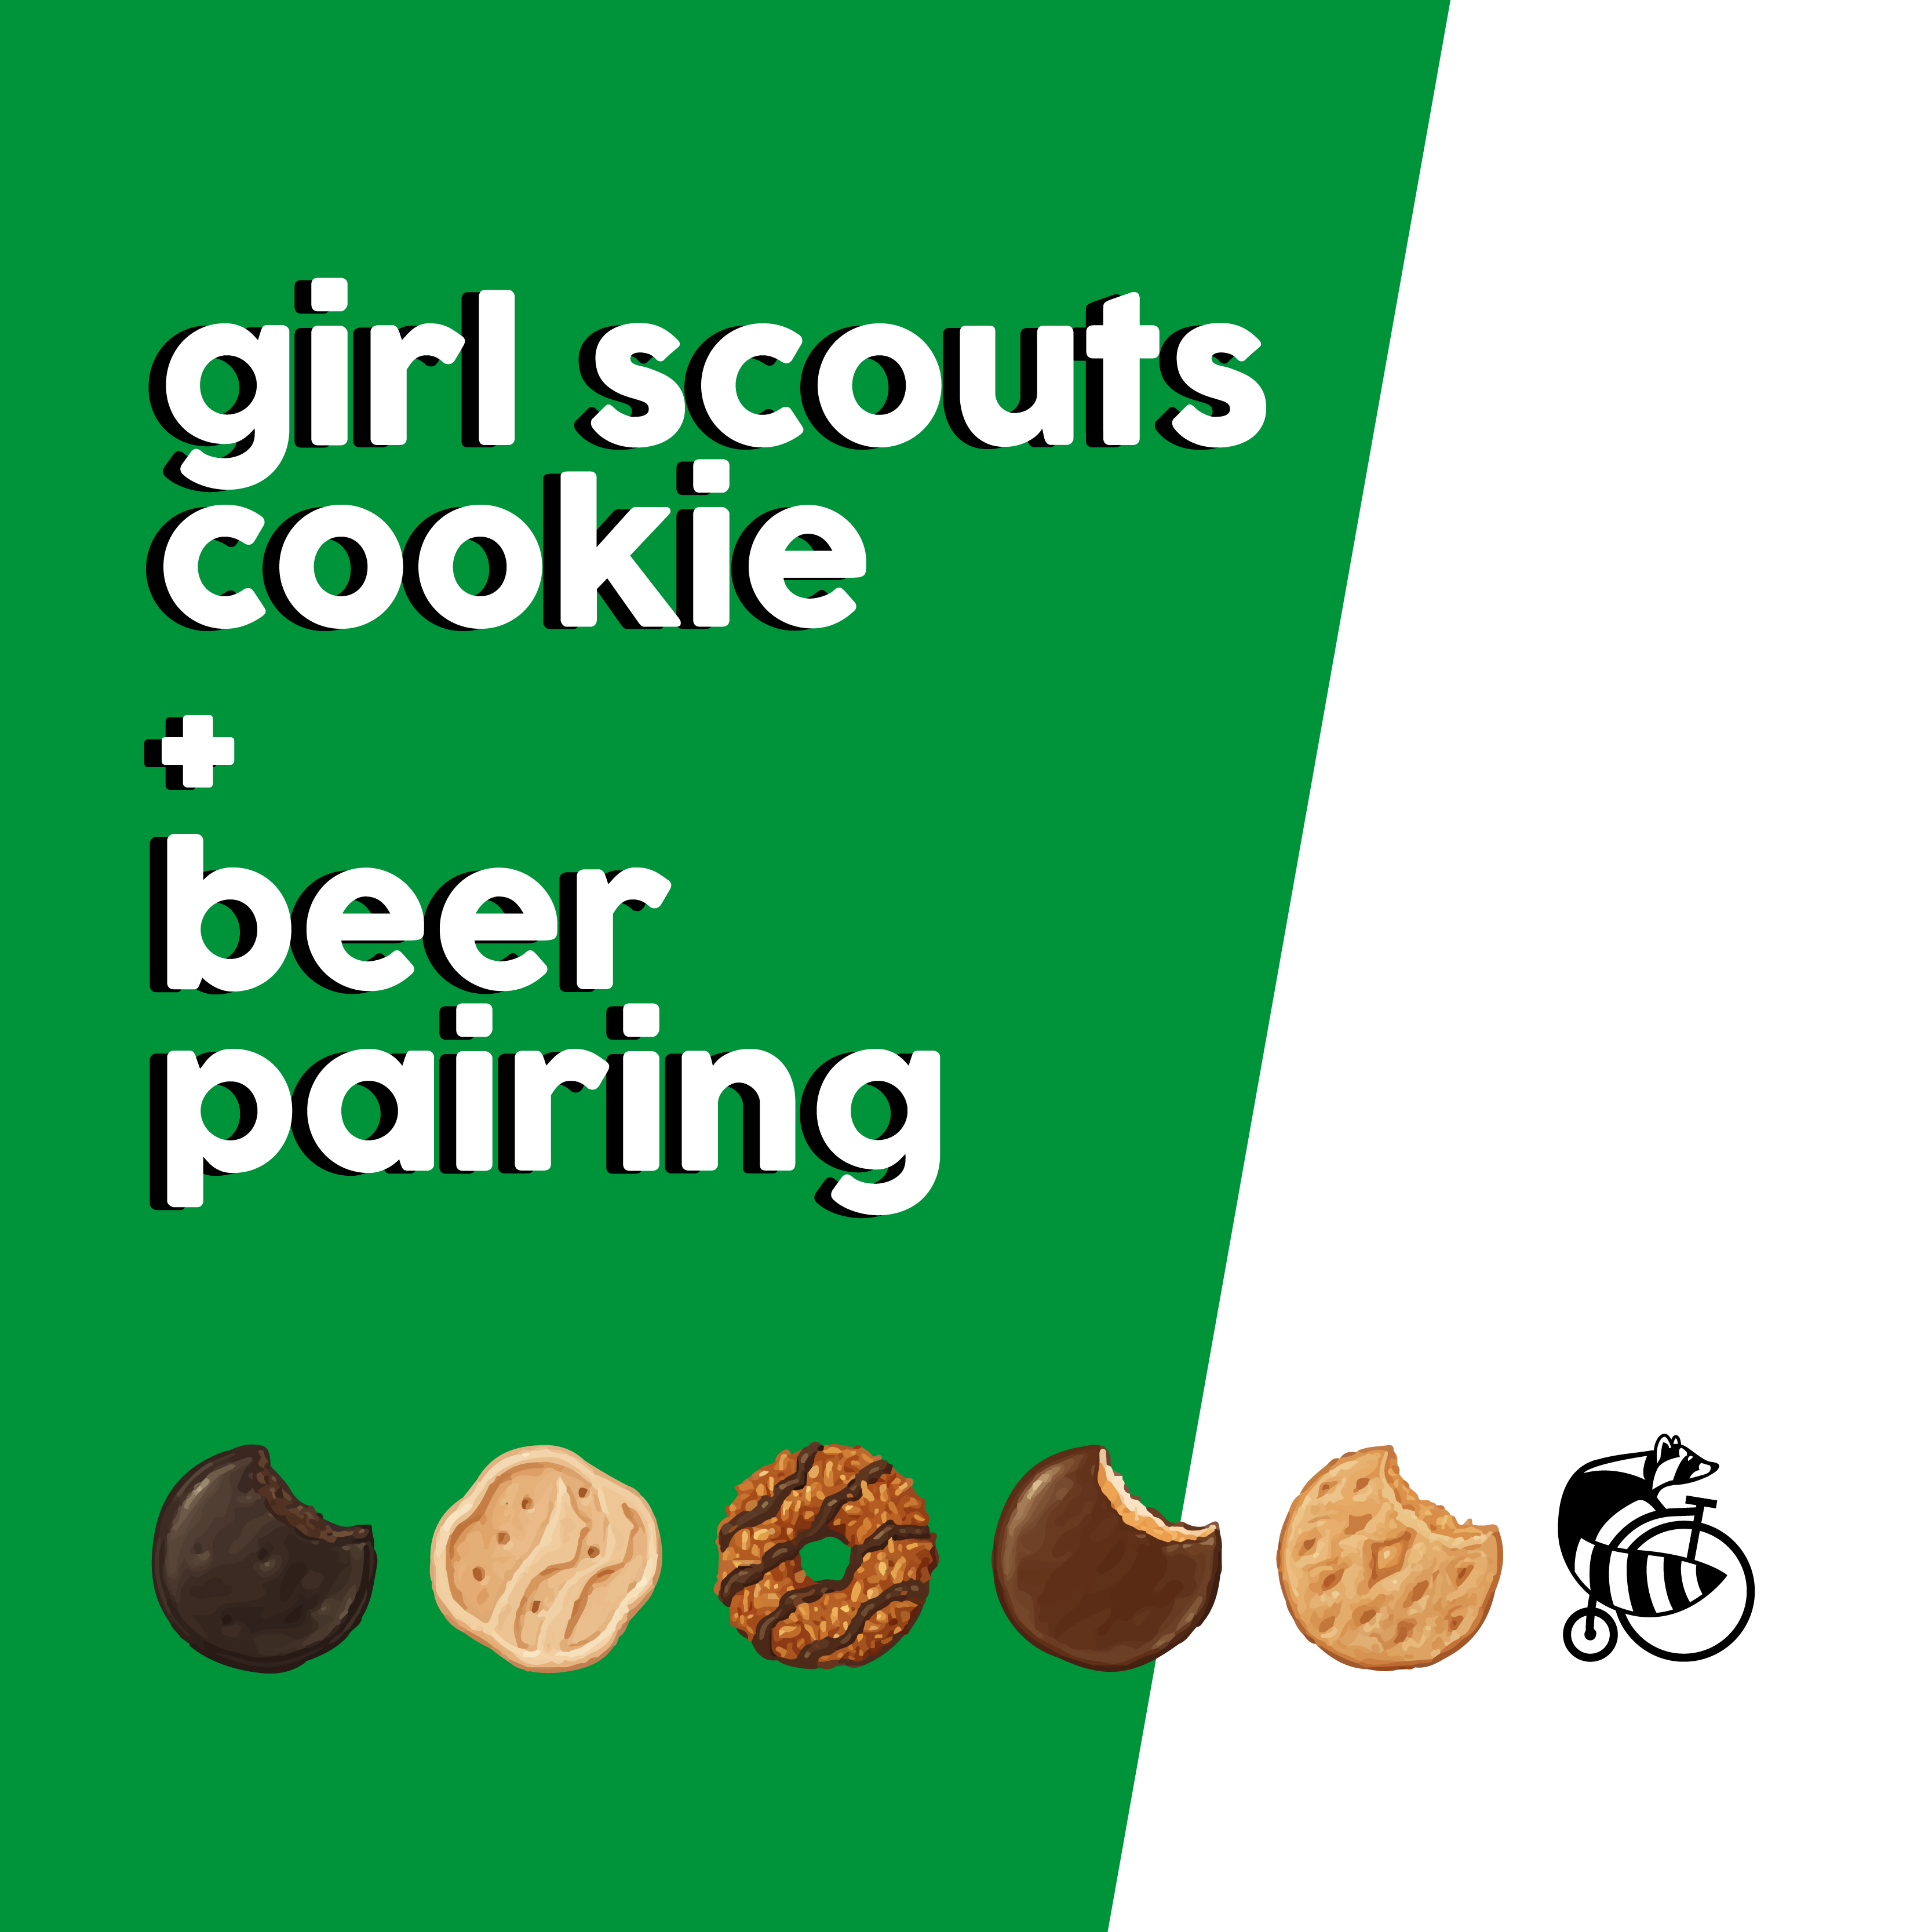 graphic to promote the girl scout cookie and beer pairing. green and white with little girl scout cookies along the bottom